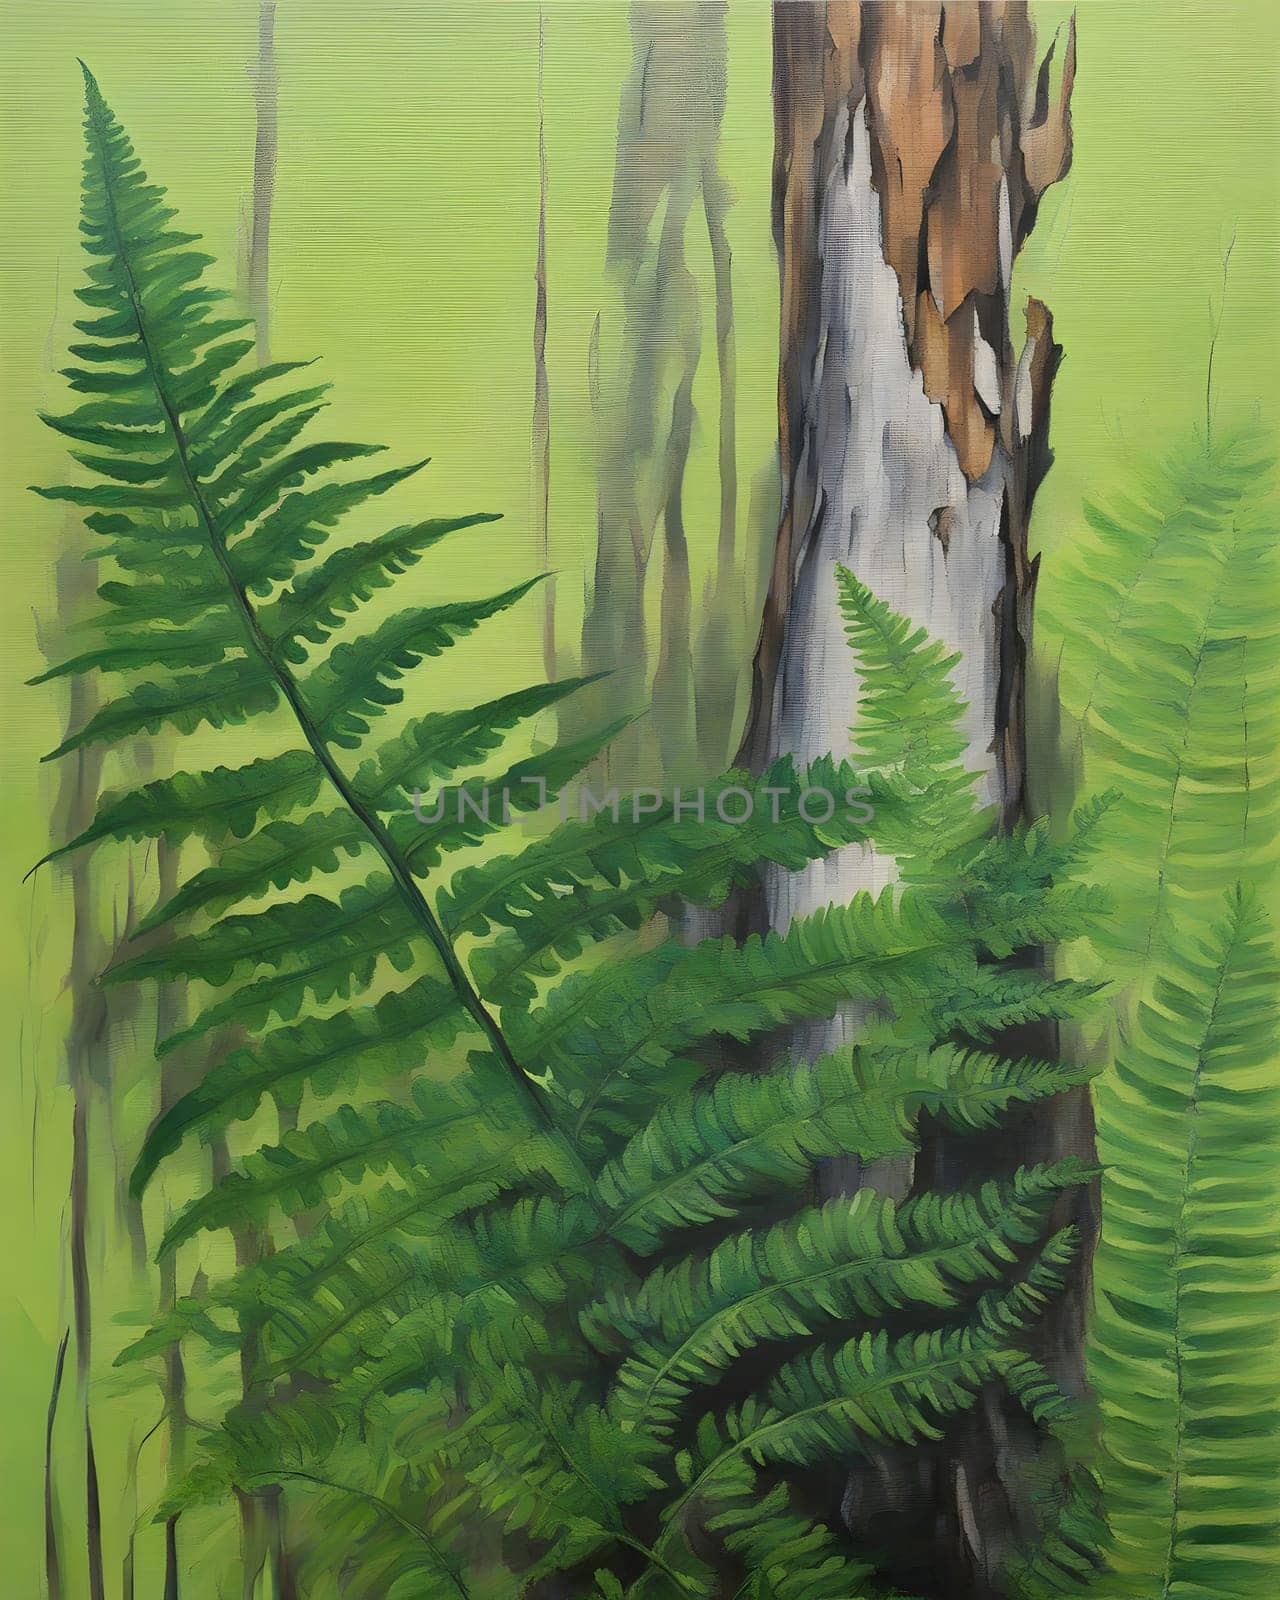 Painting acrylic on canvas Green fern, green fern leaf, dry tree trunk in the background Generate AI